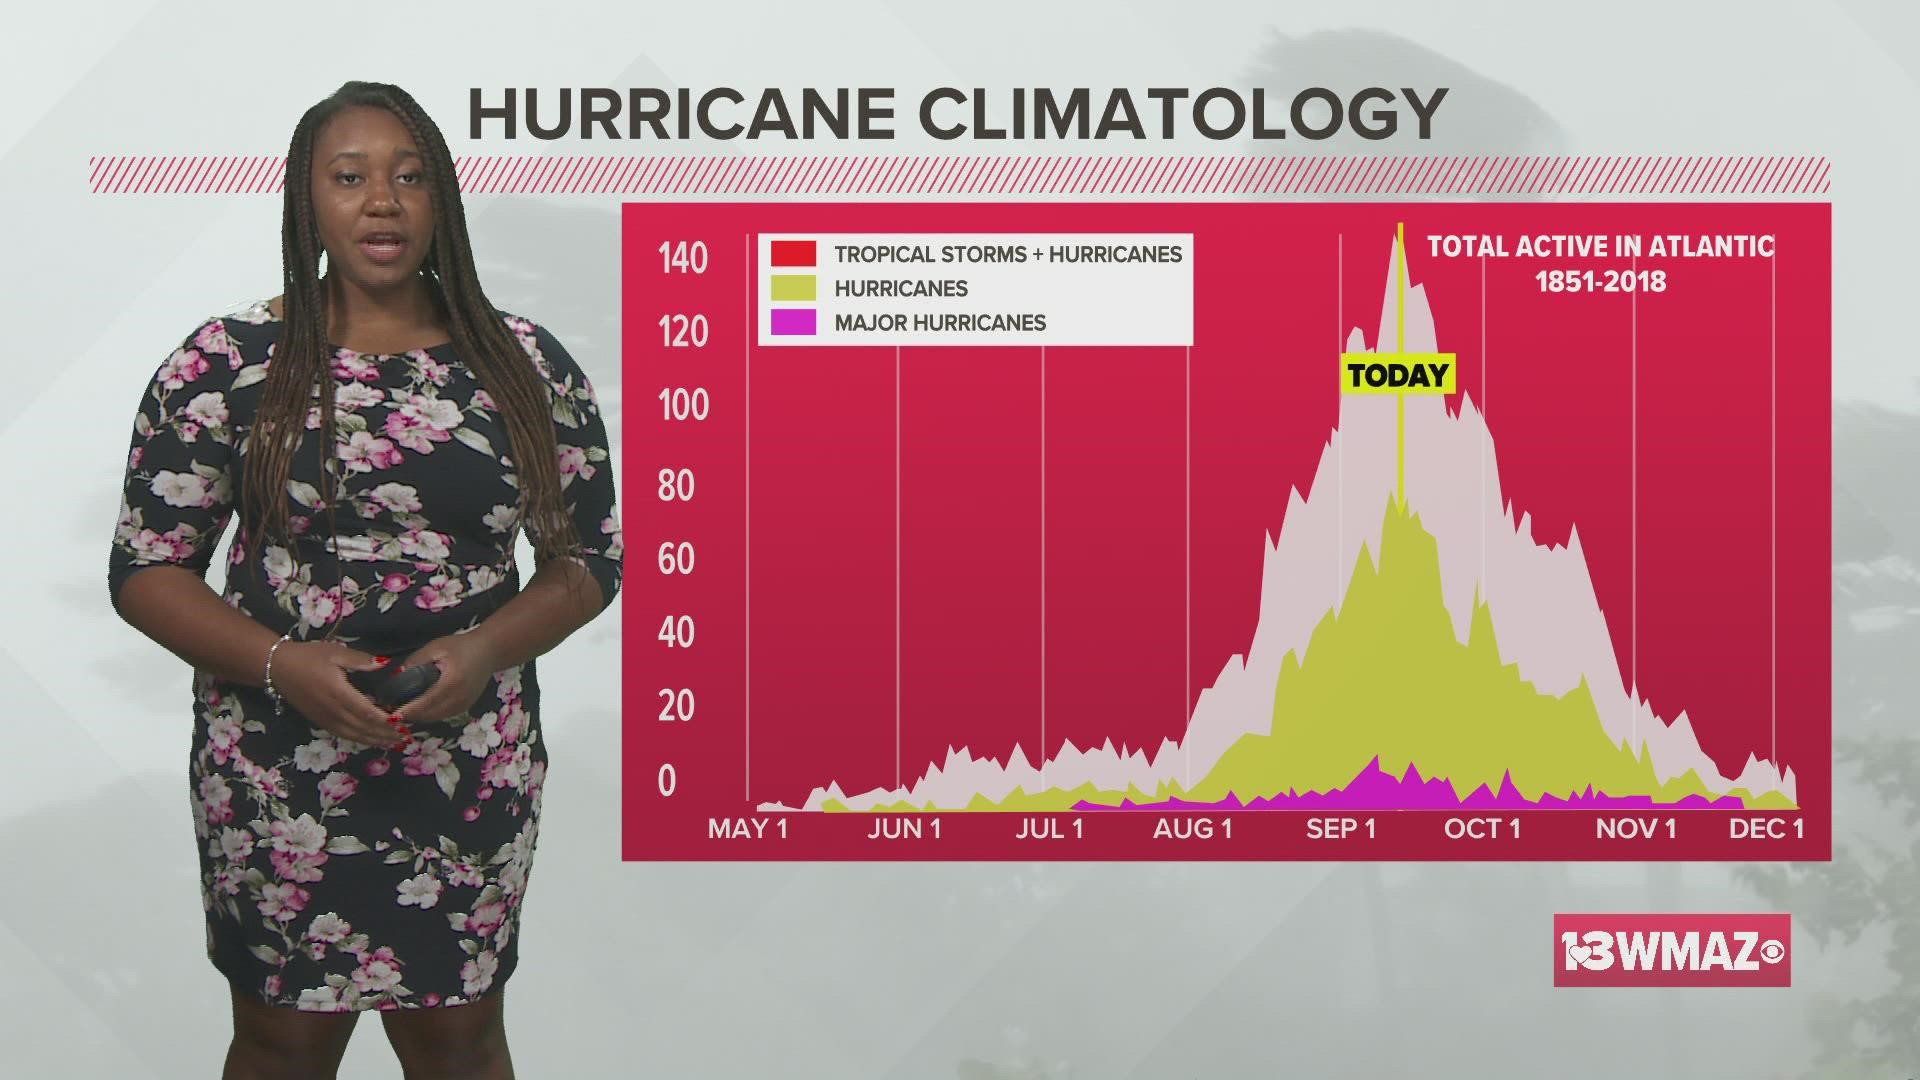 We are in the peak of hurricane season now, and we've had an active season so far. Hurricane season ends November 30.